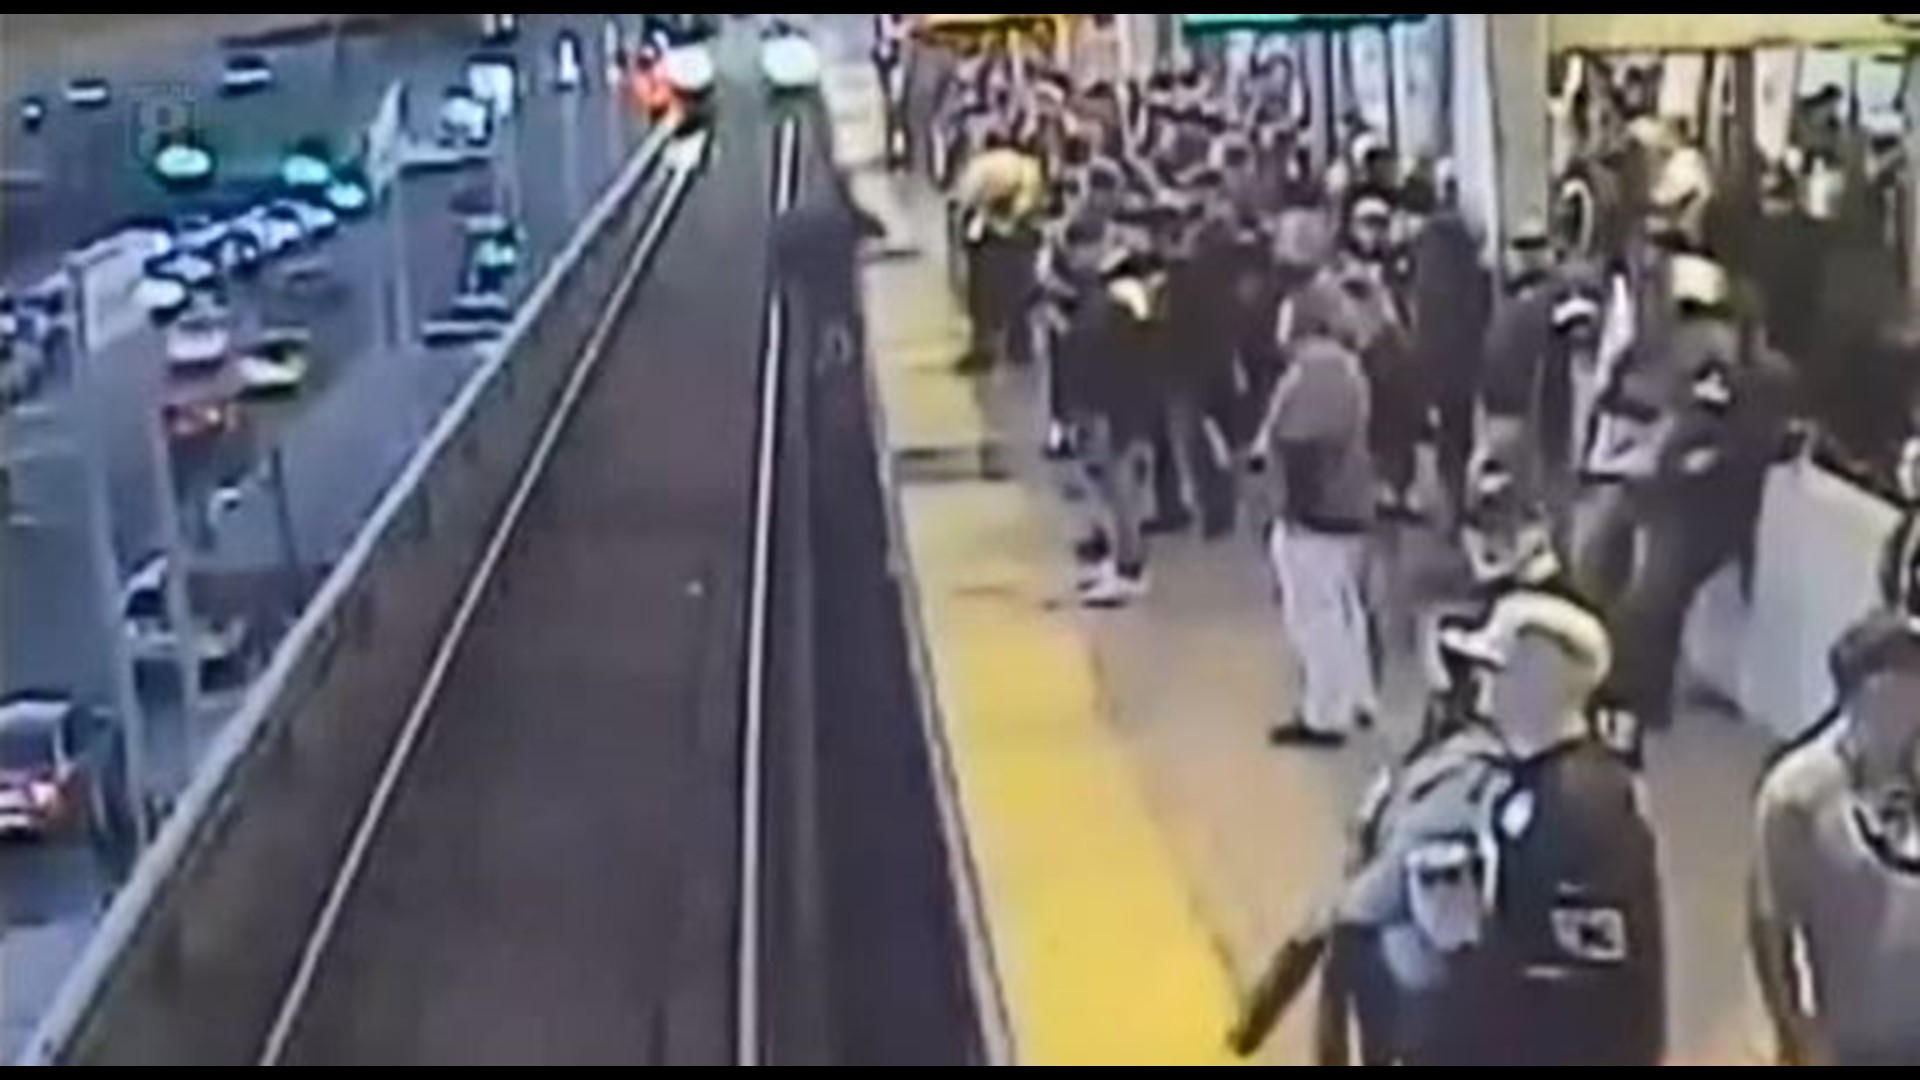 California transit worker rescues man from oncoming train